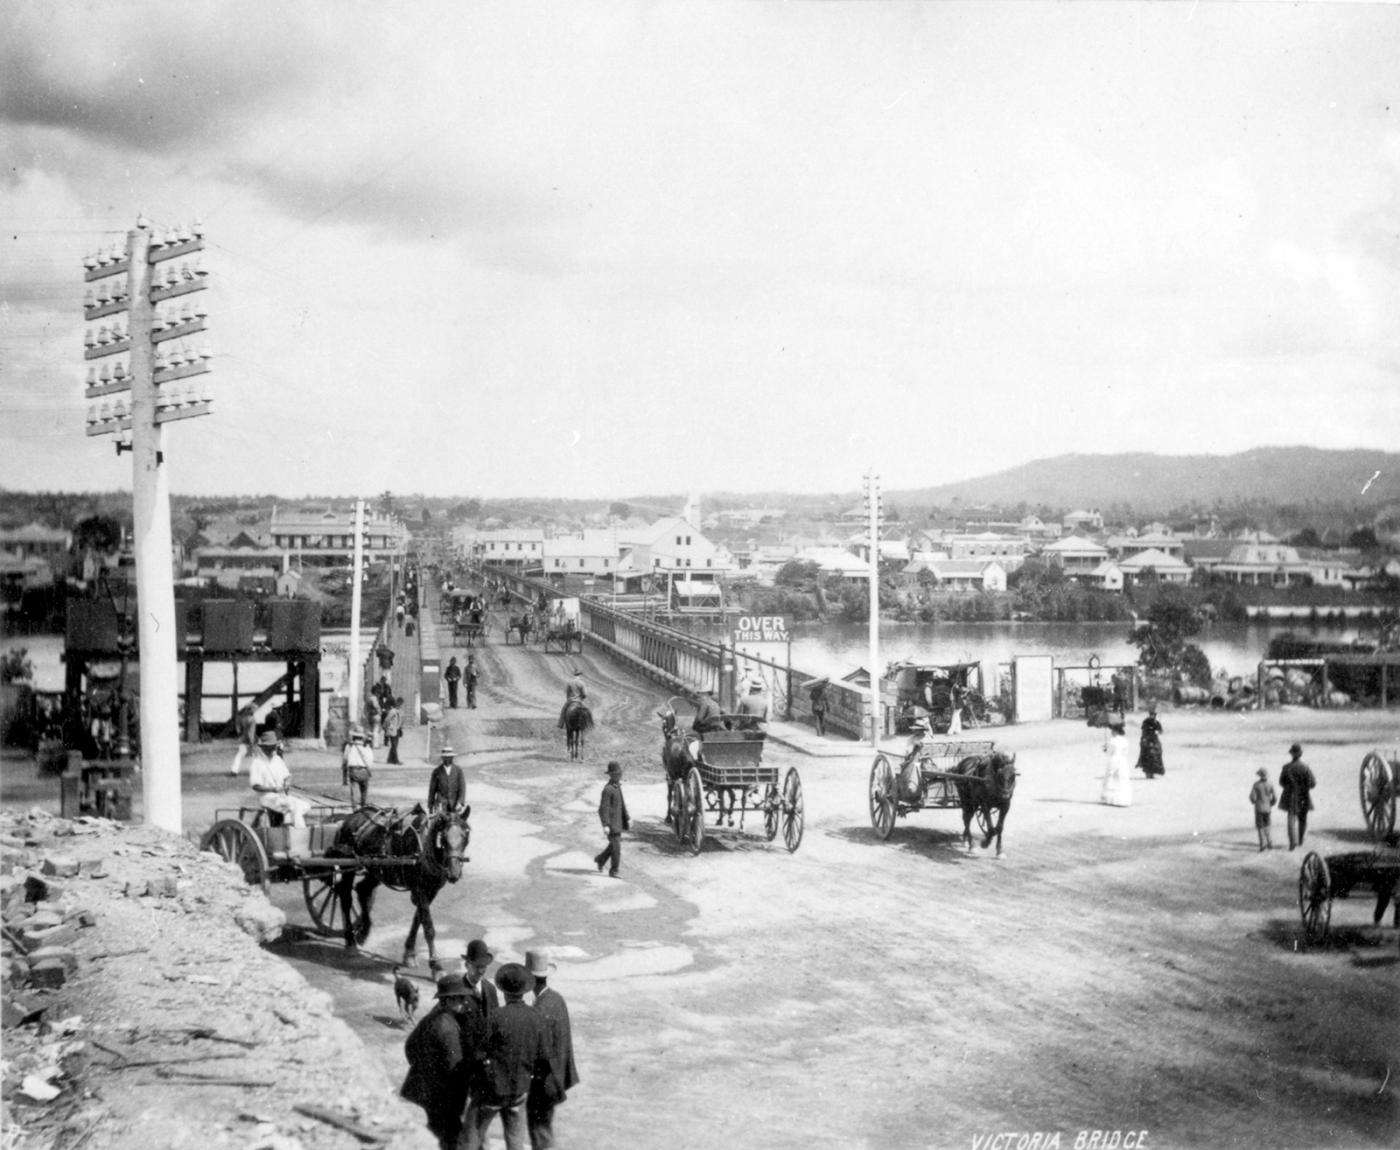 View of Victoria Bridge with horses and carriages crossing